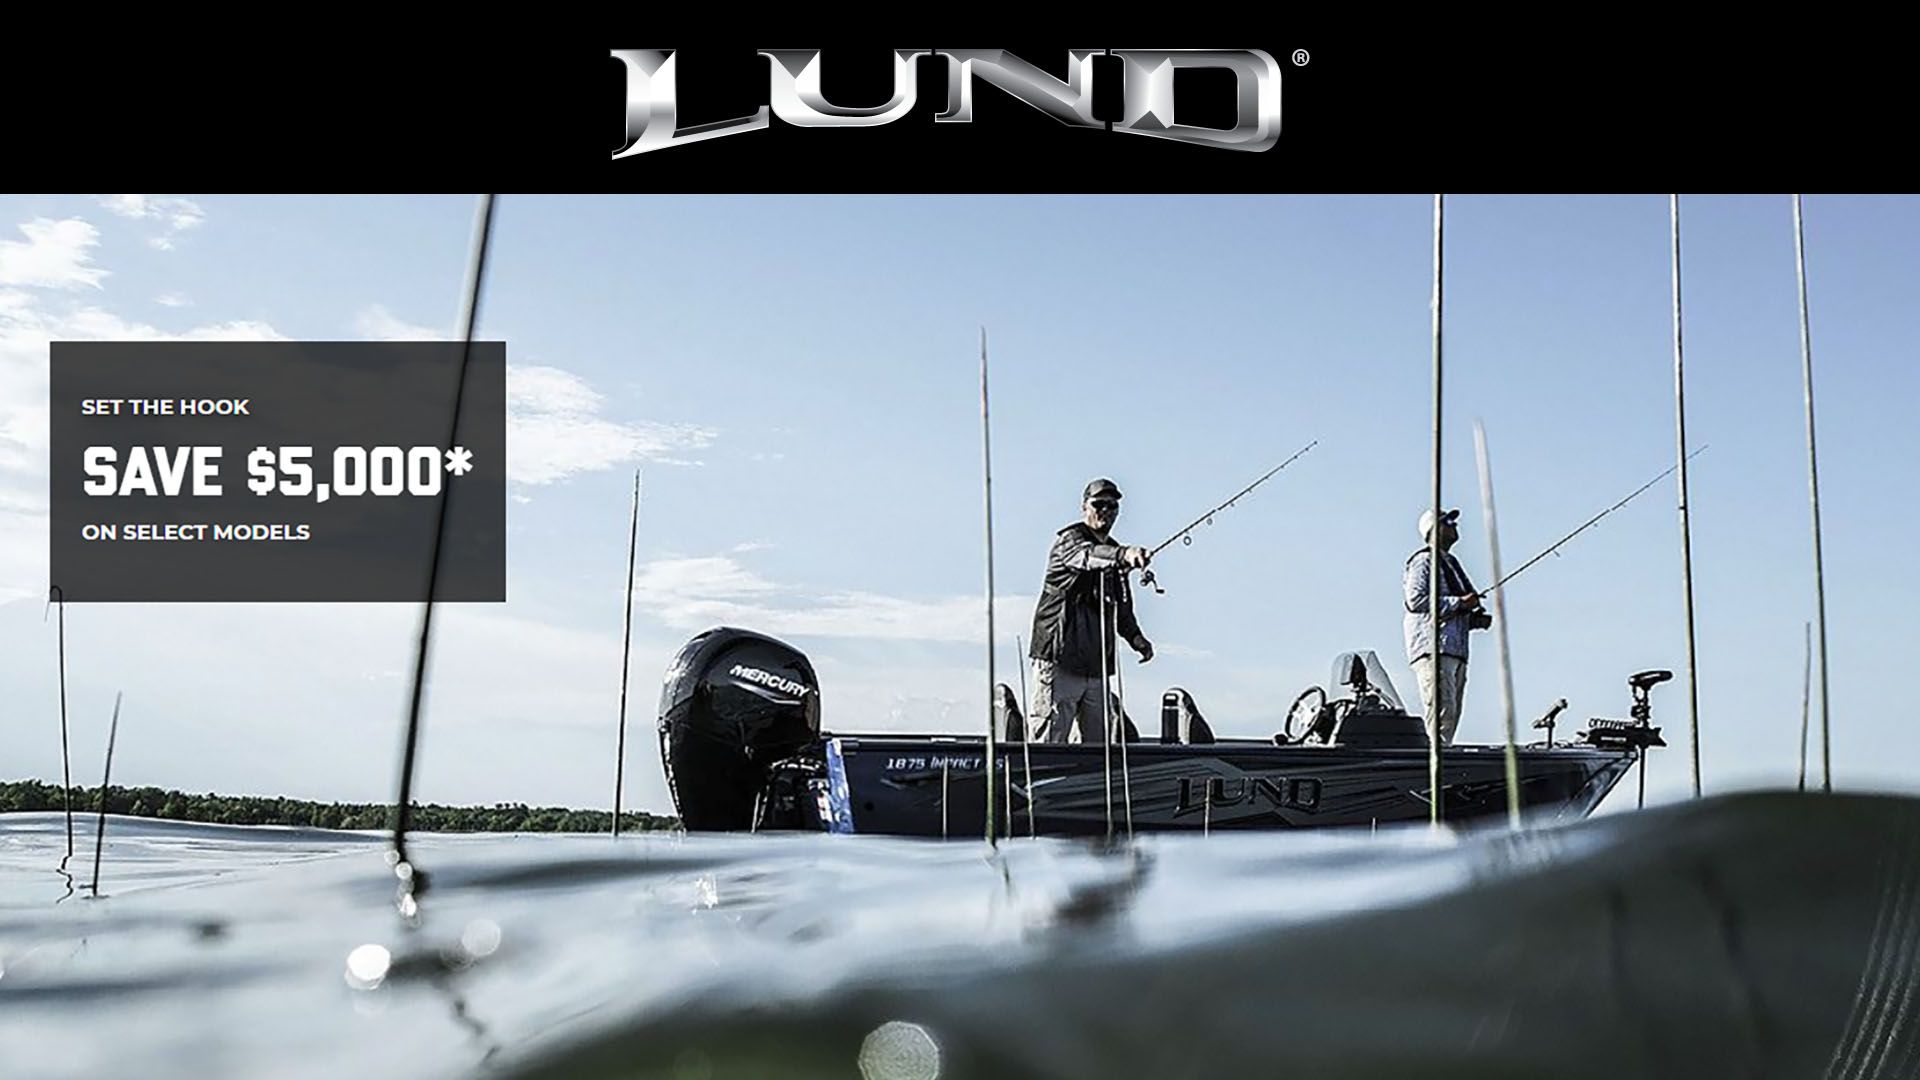 Lund - Set The Hook - Save Up To $5,000